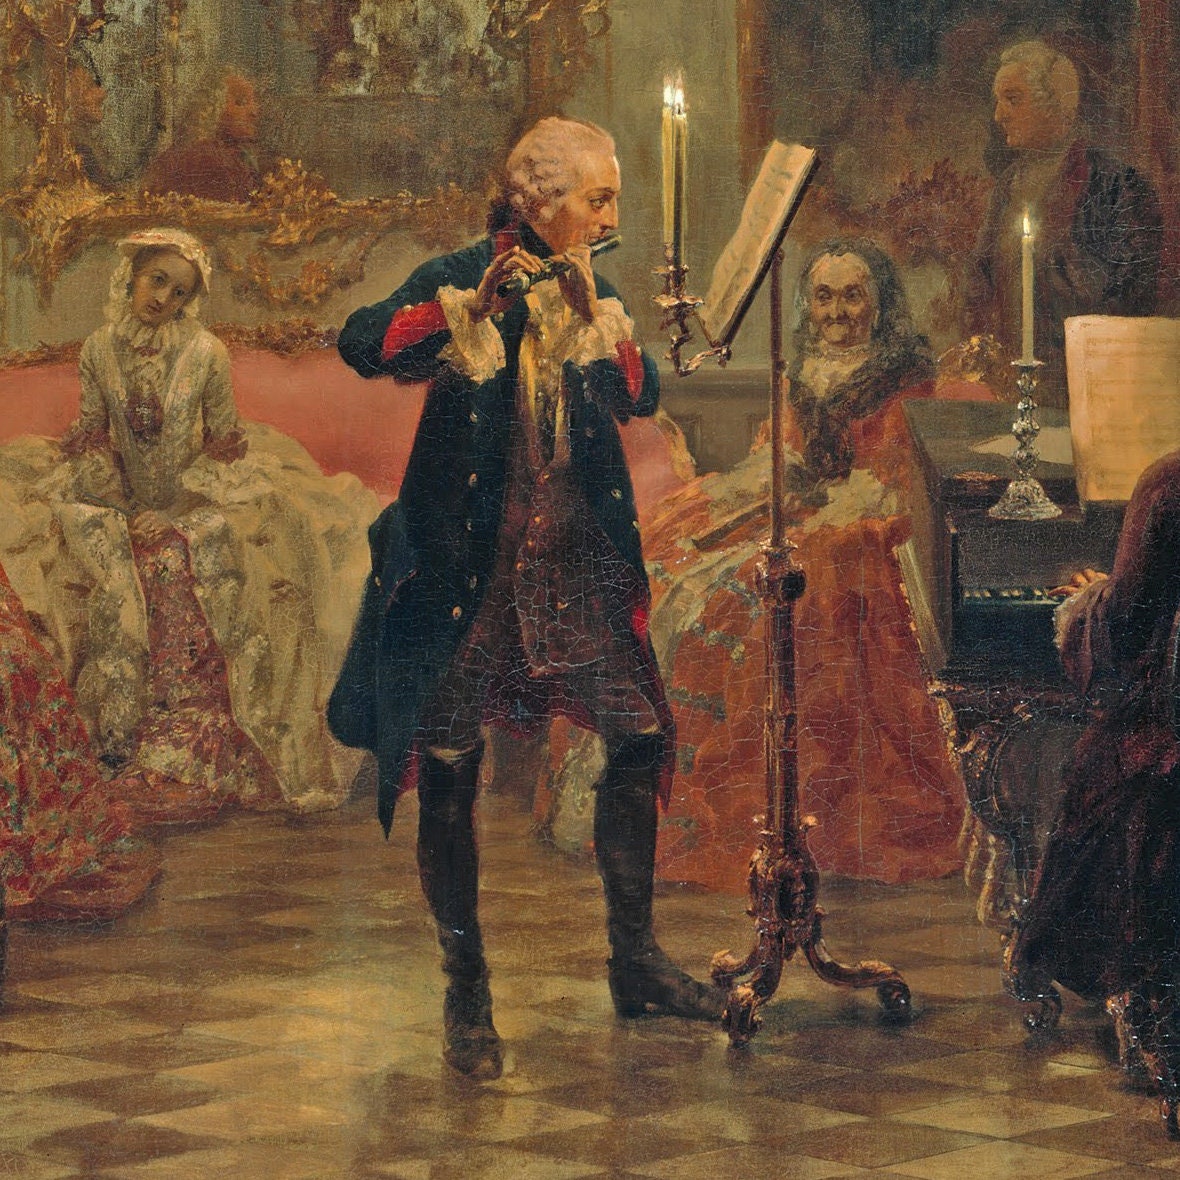 Flute Concert by Adolph Menzel, 3d Printed with texture and brush strokes looks like original oil-painting, code:085